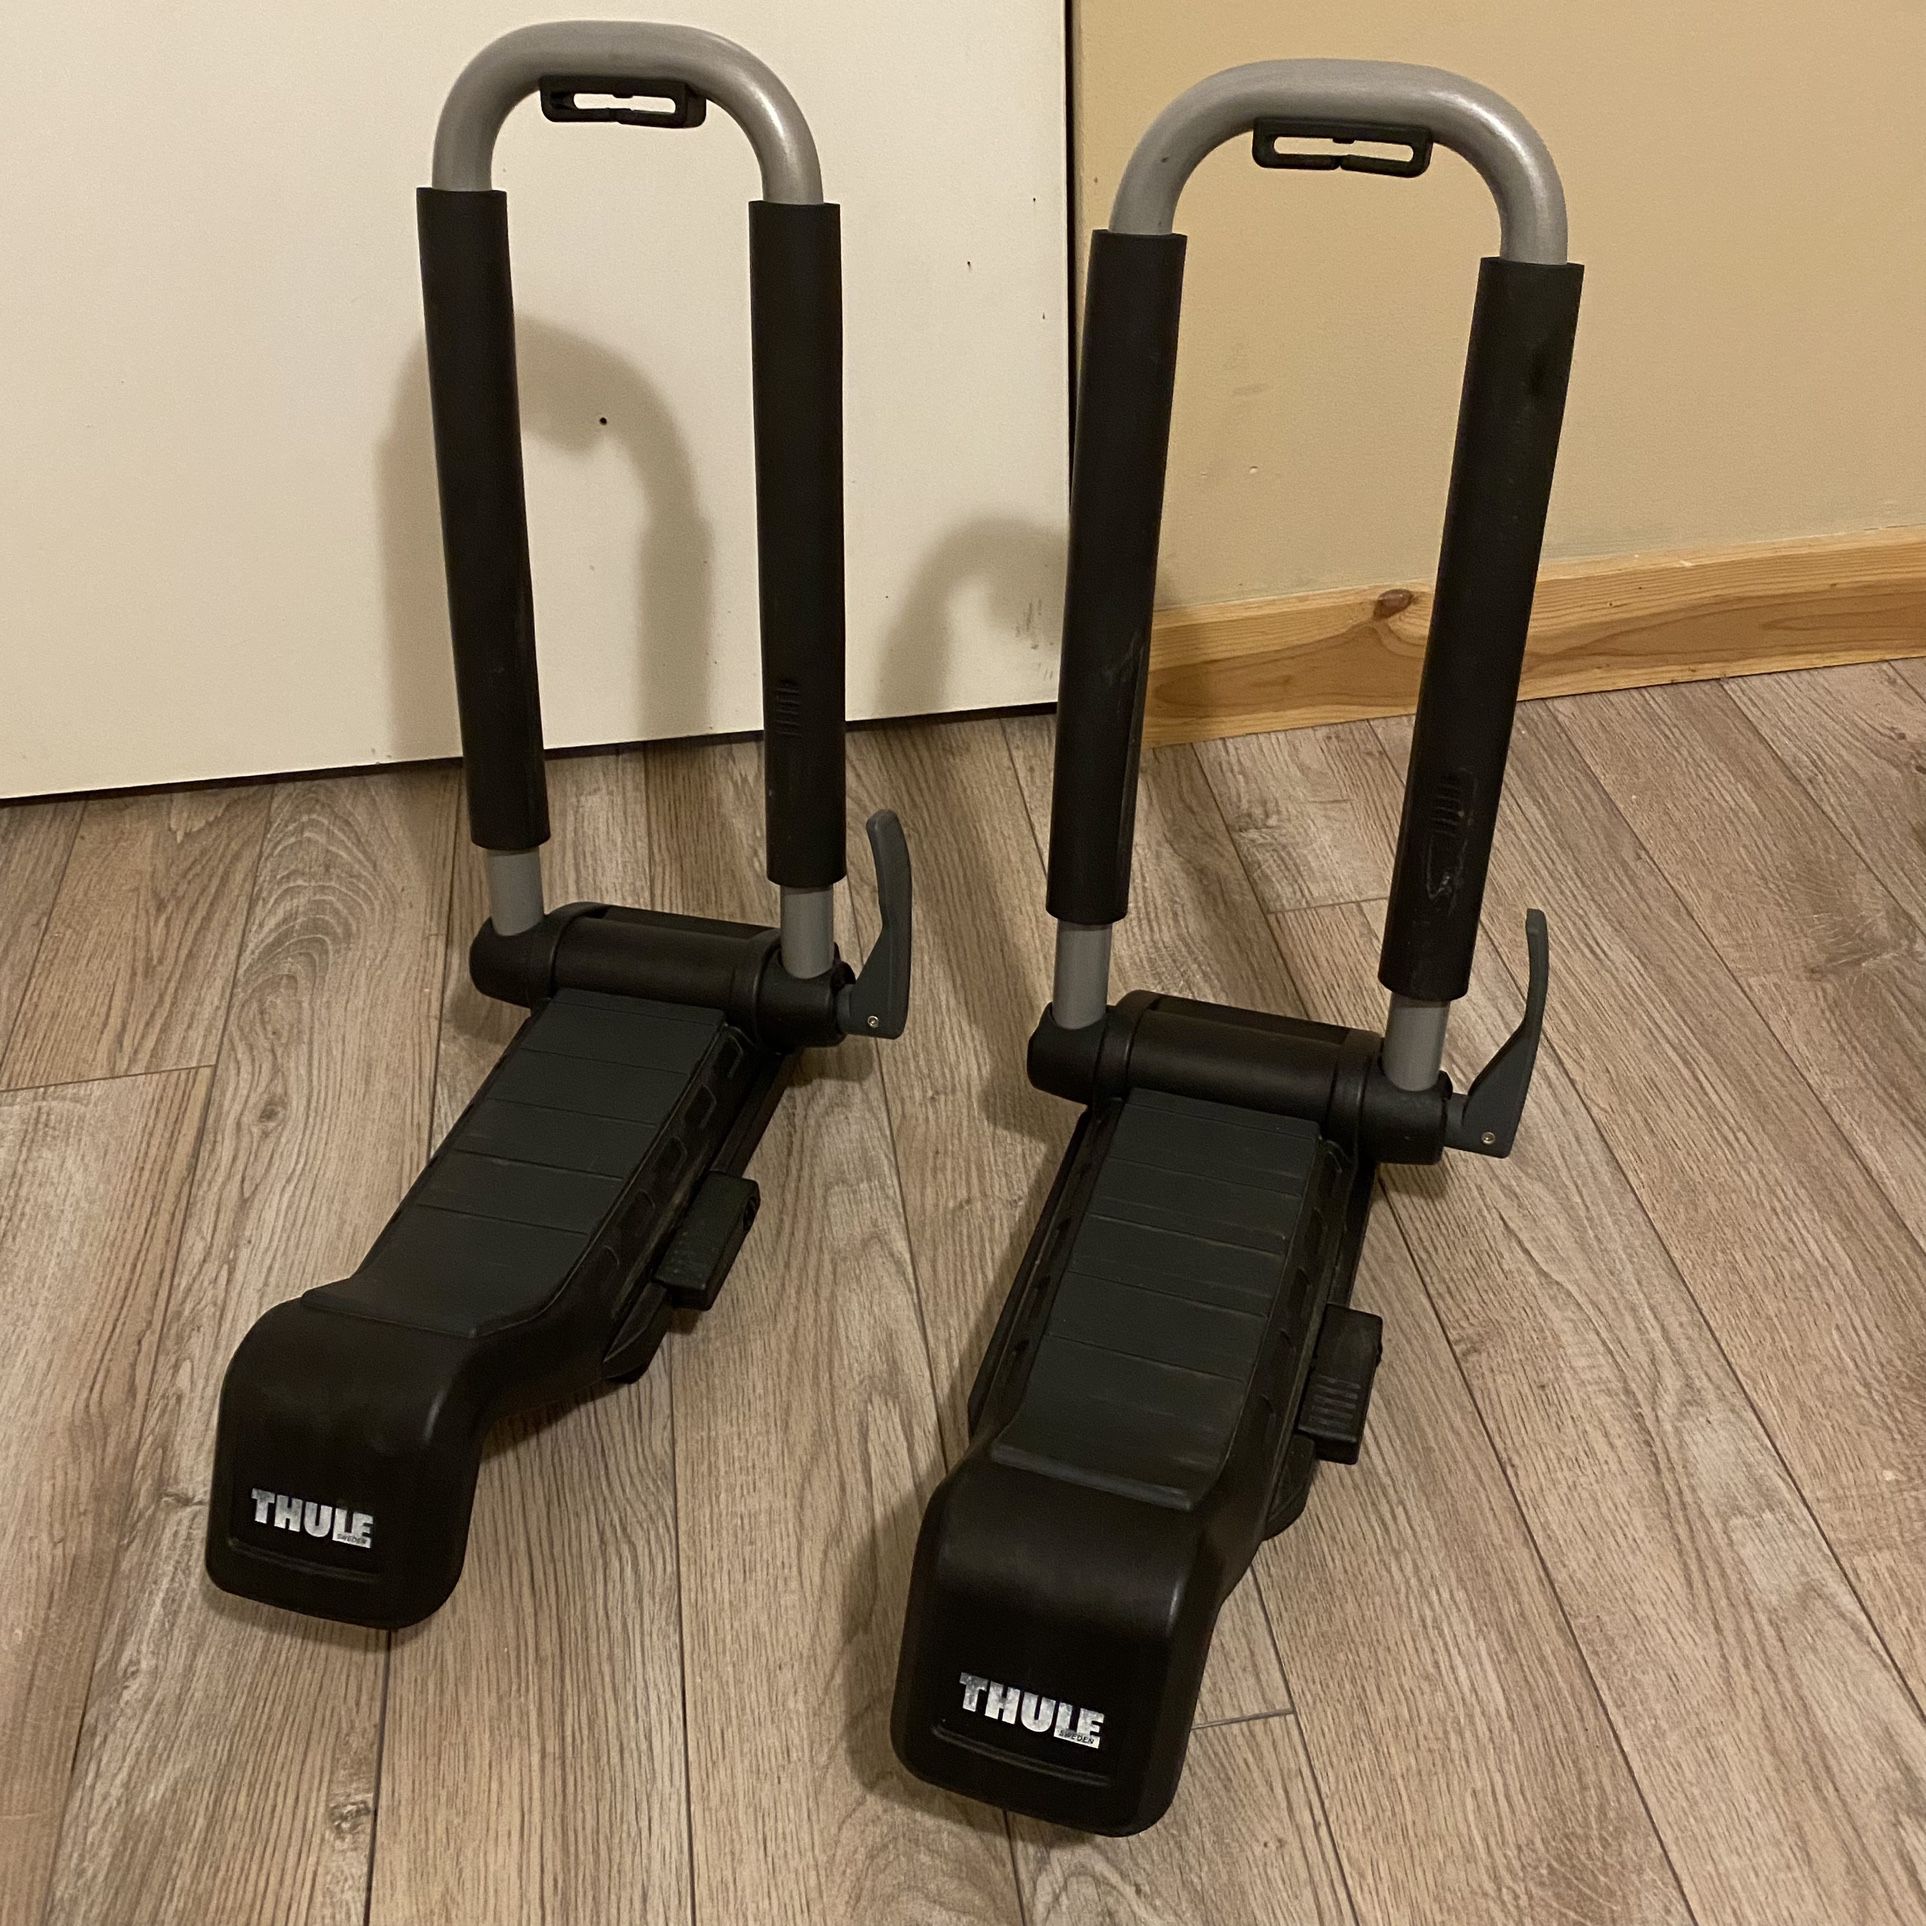 Thule Kayak Carrier Part Number: SOA567K010. (No Straps Or Tie Downs)